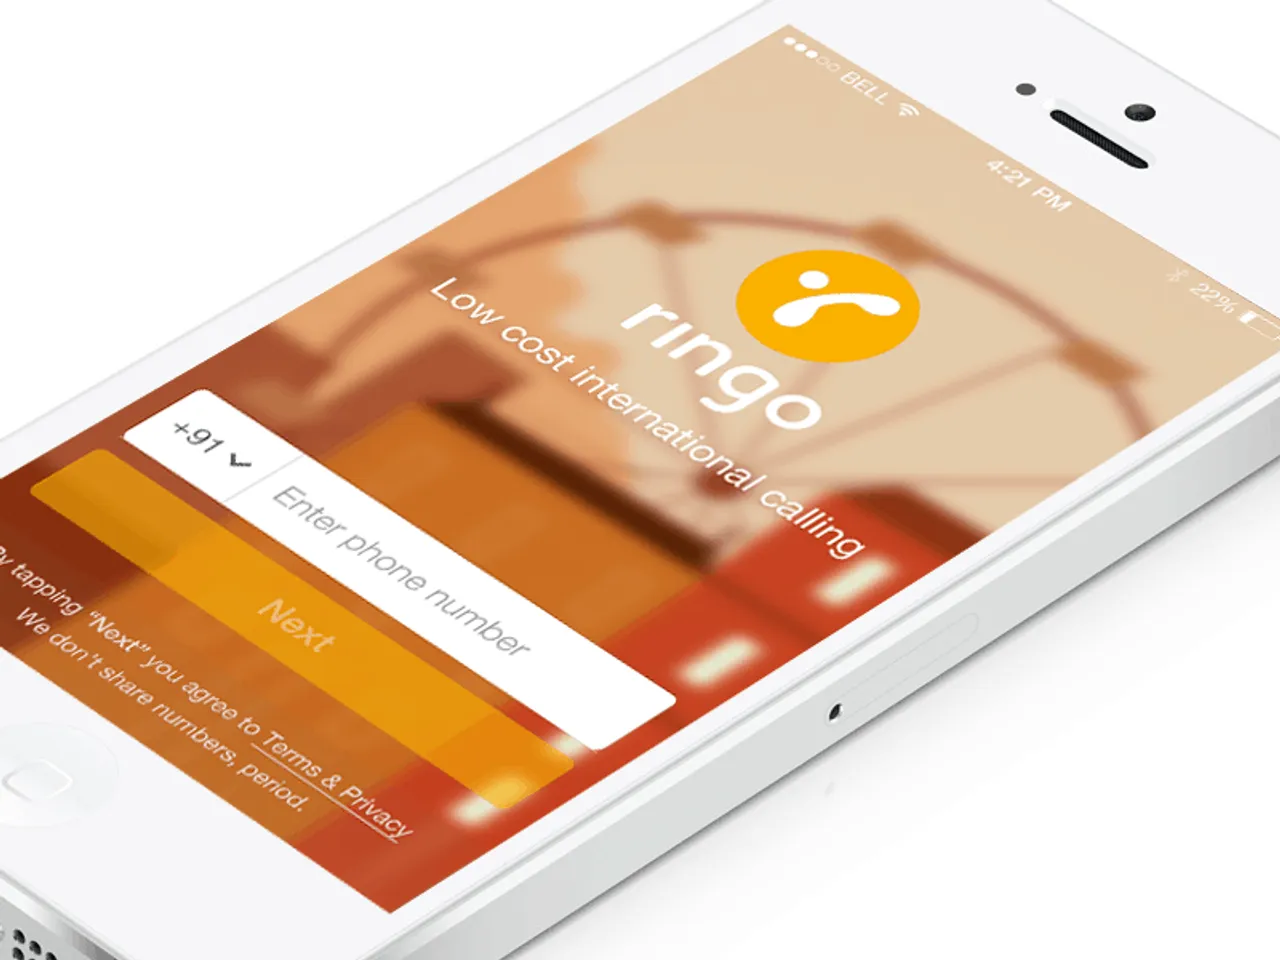 Ringo app launches industry's cheapest local calling service at 19 paise per minute